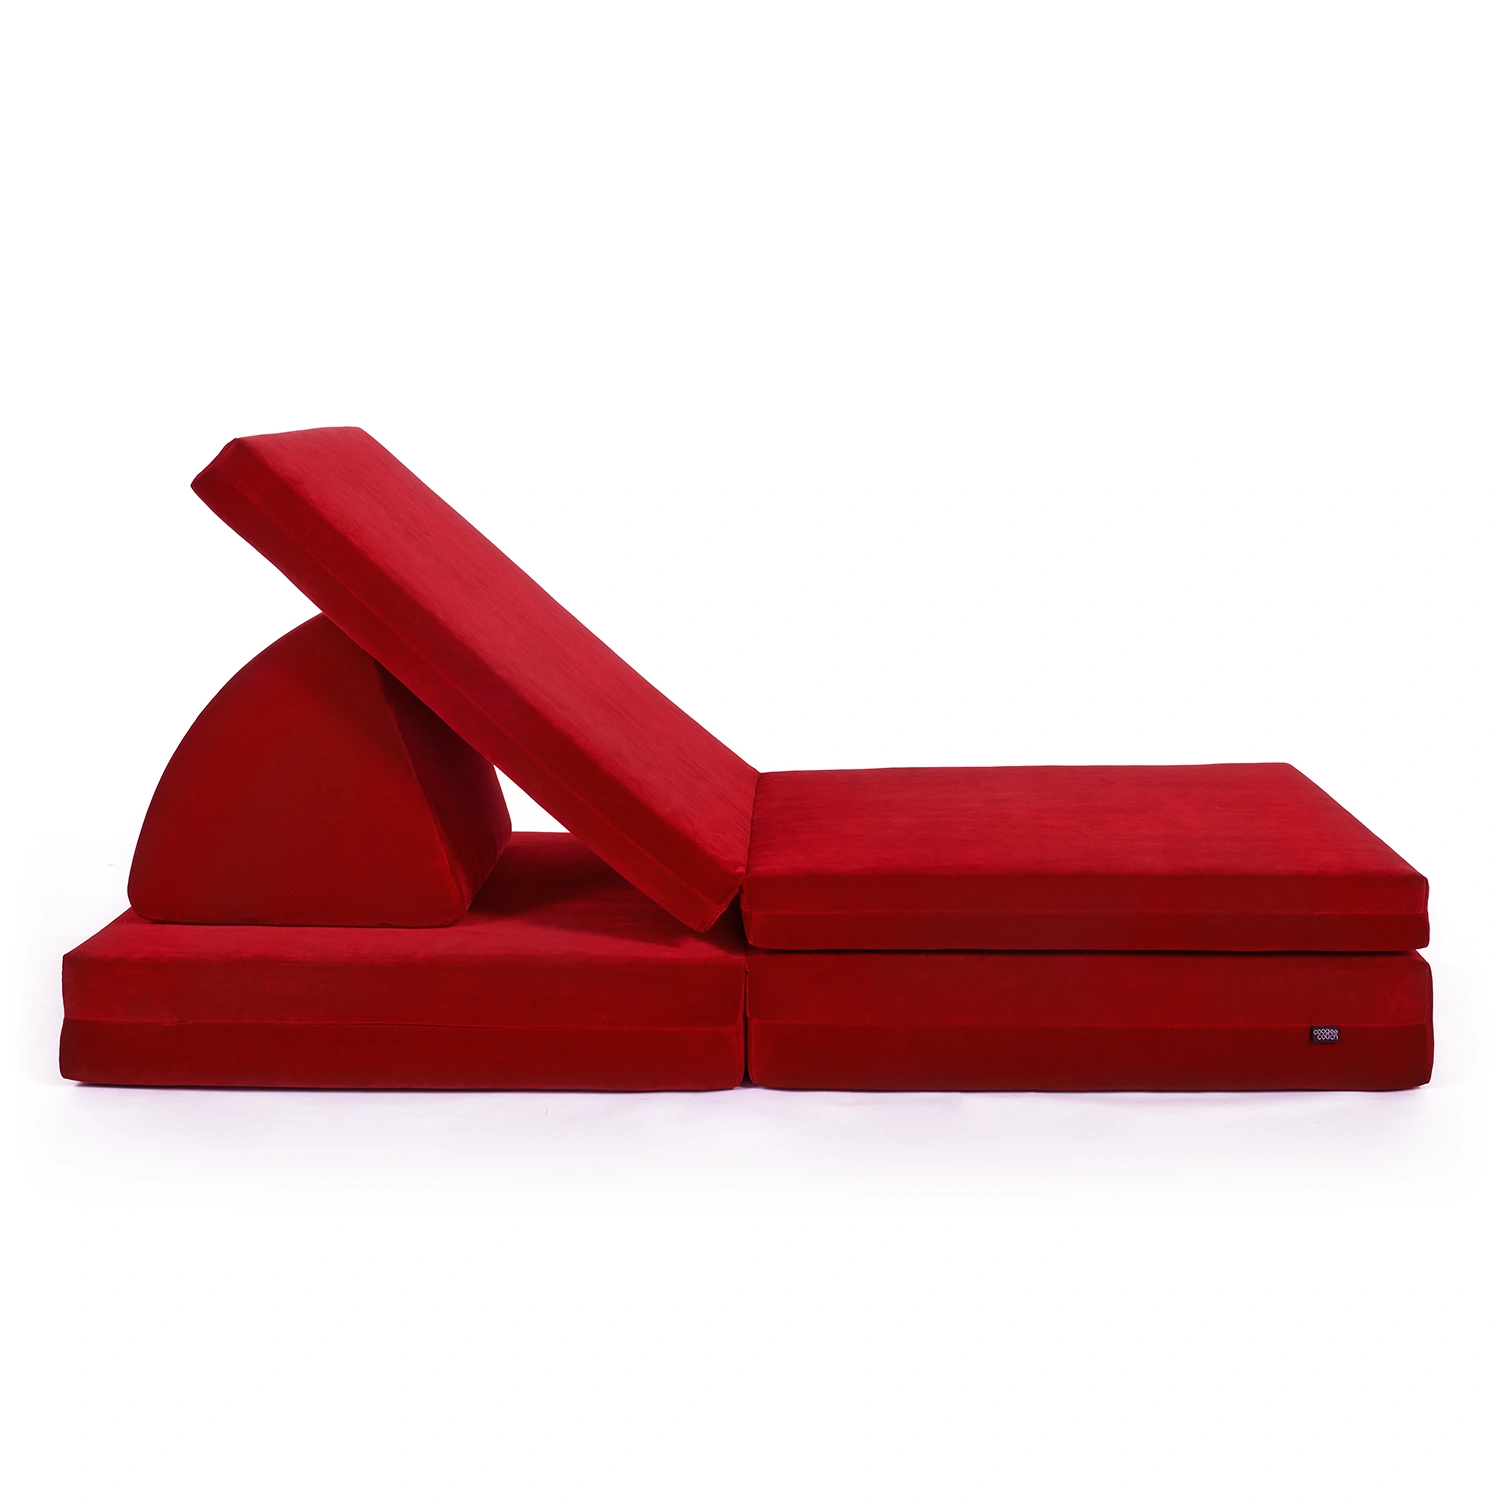 coogeecouch | Kindersofa | Serie: scuderia-fantasia | Farbe: chilli-red hellrot | Ansicht: Front Lounge | made in Germany